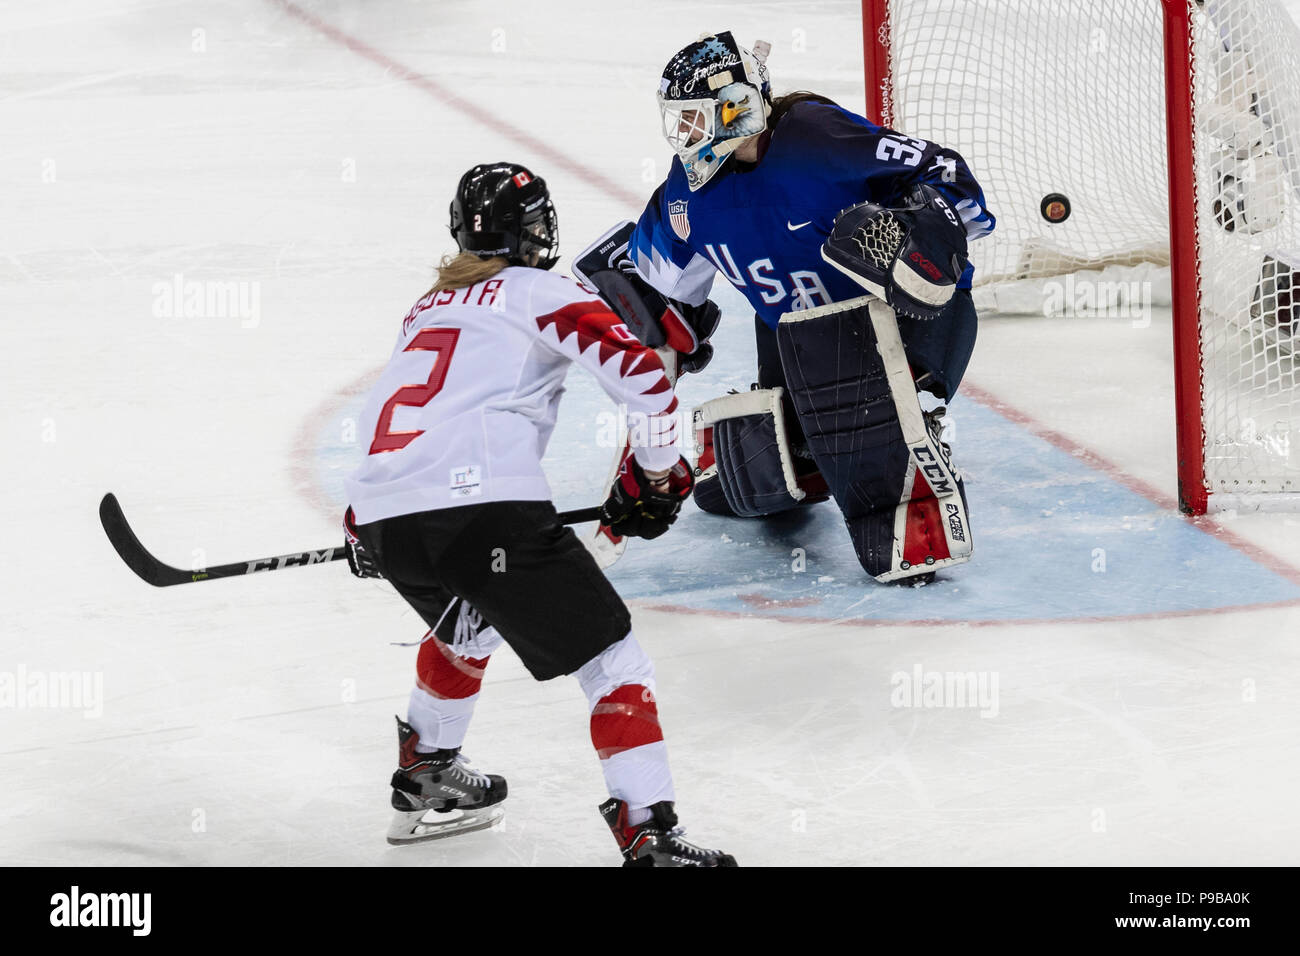 Goalie Maddie Rooney (USA) during the Gold medal Women's Ice Hockey game USA vs Canada at the Olympic Winter Games PyeongChang 2018 Stock Photo